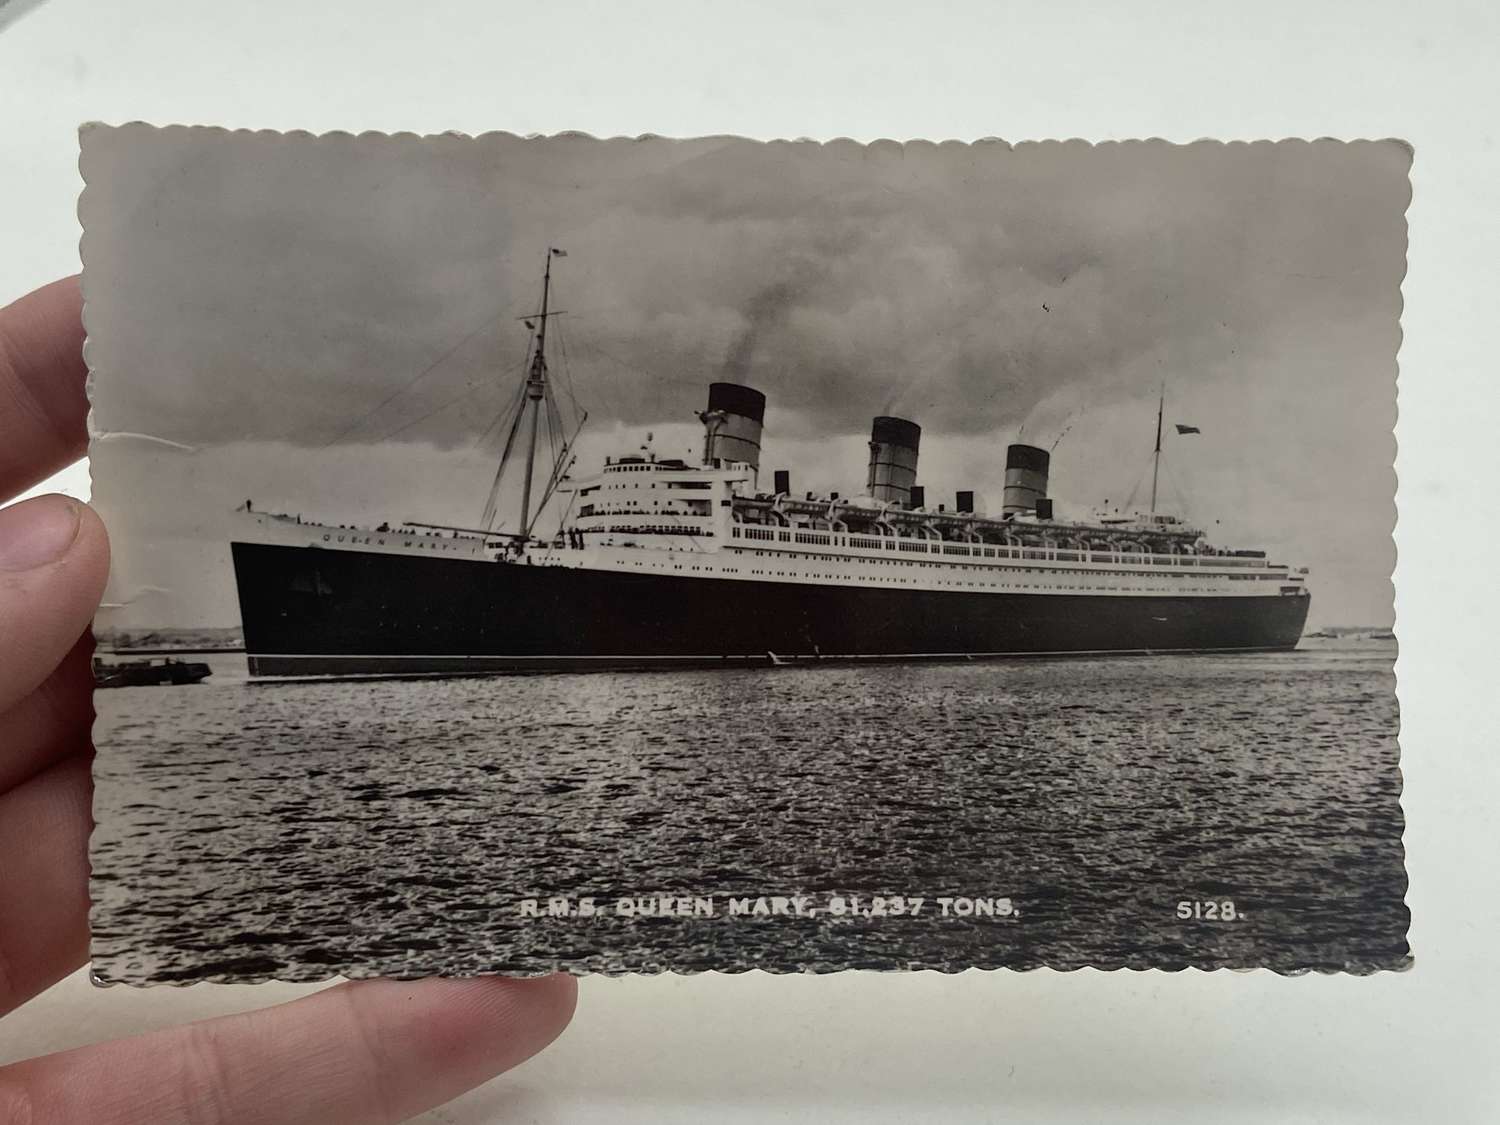 Vintage 1950s R.M.S Queen Mary 61,237 Tons Photographic Postcard